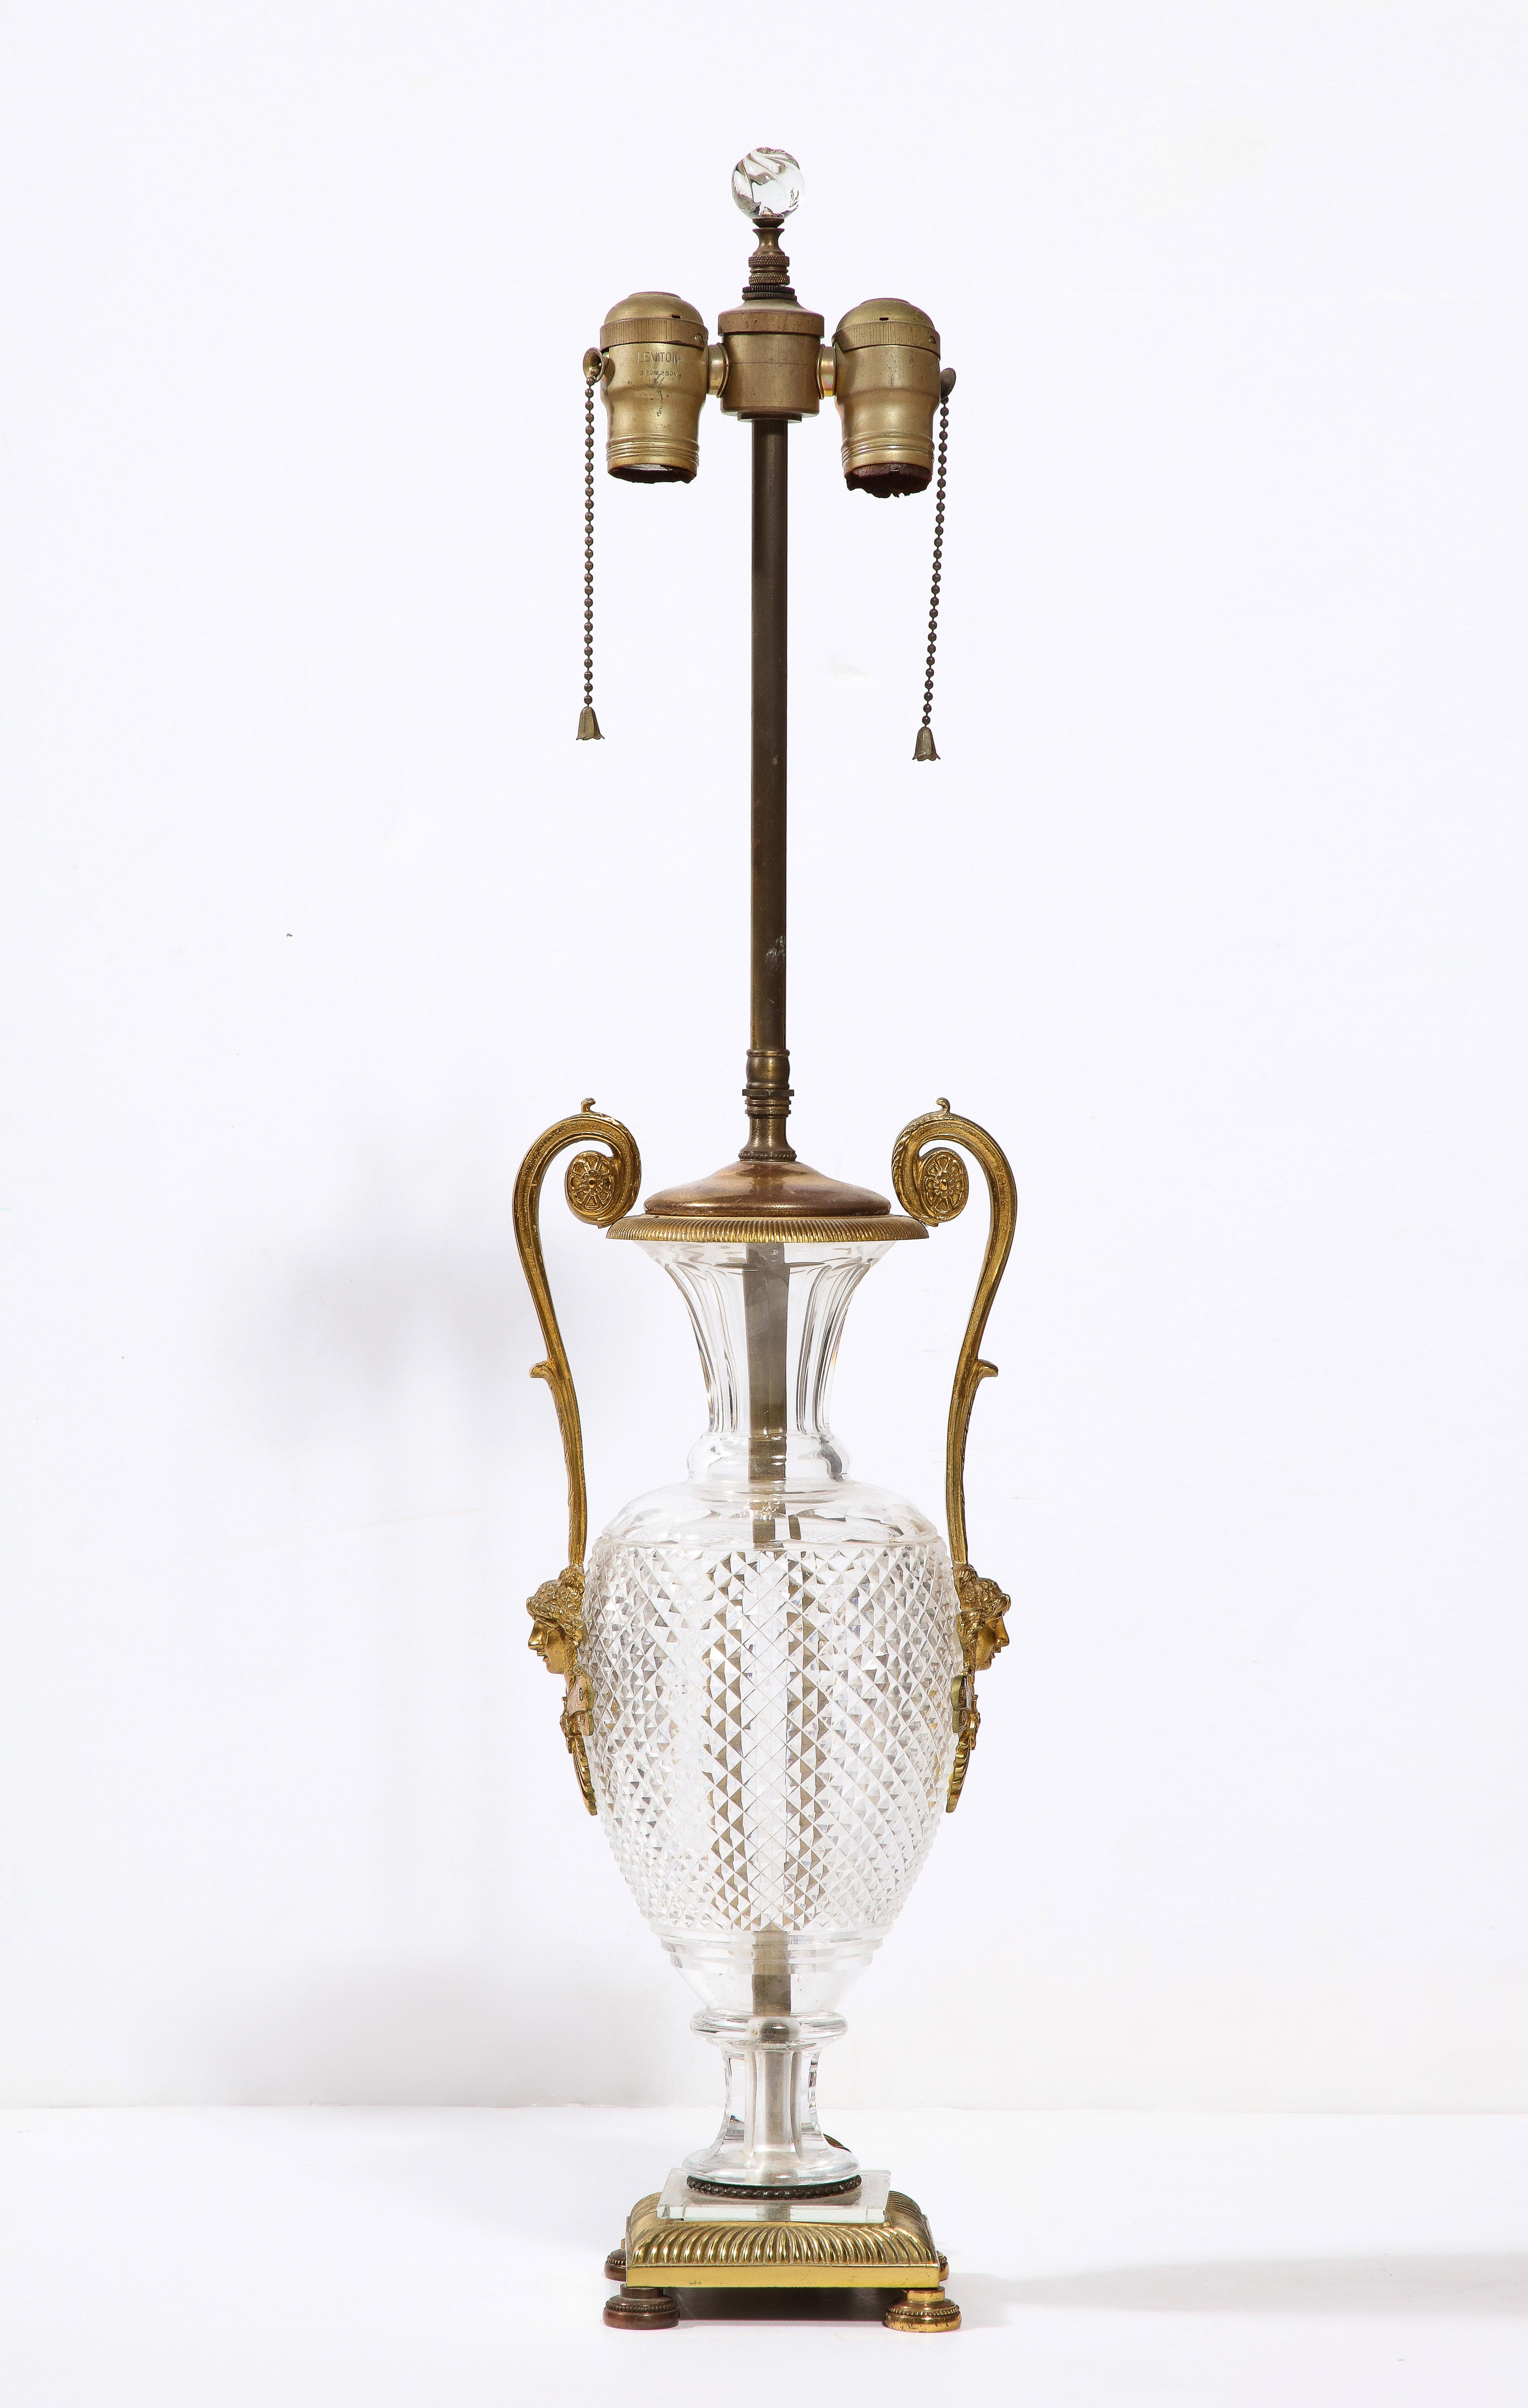 A fine French neoclassic cut crystal urn form with gilt bronze-mounted swan handles and square base.

Urn height: 15